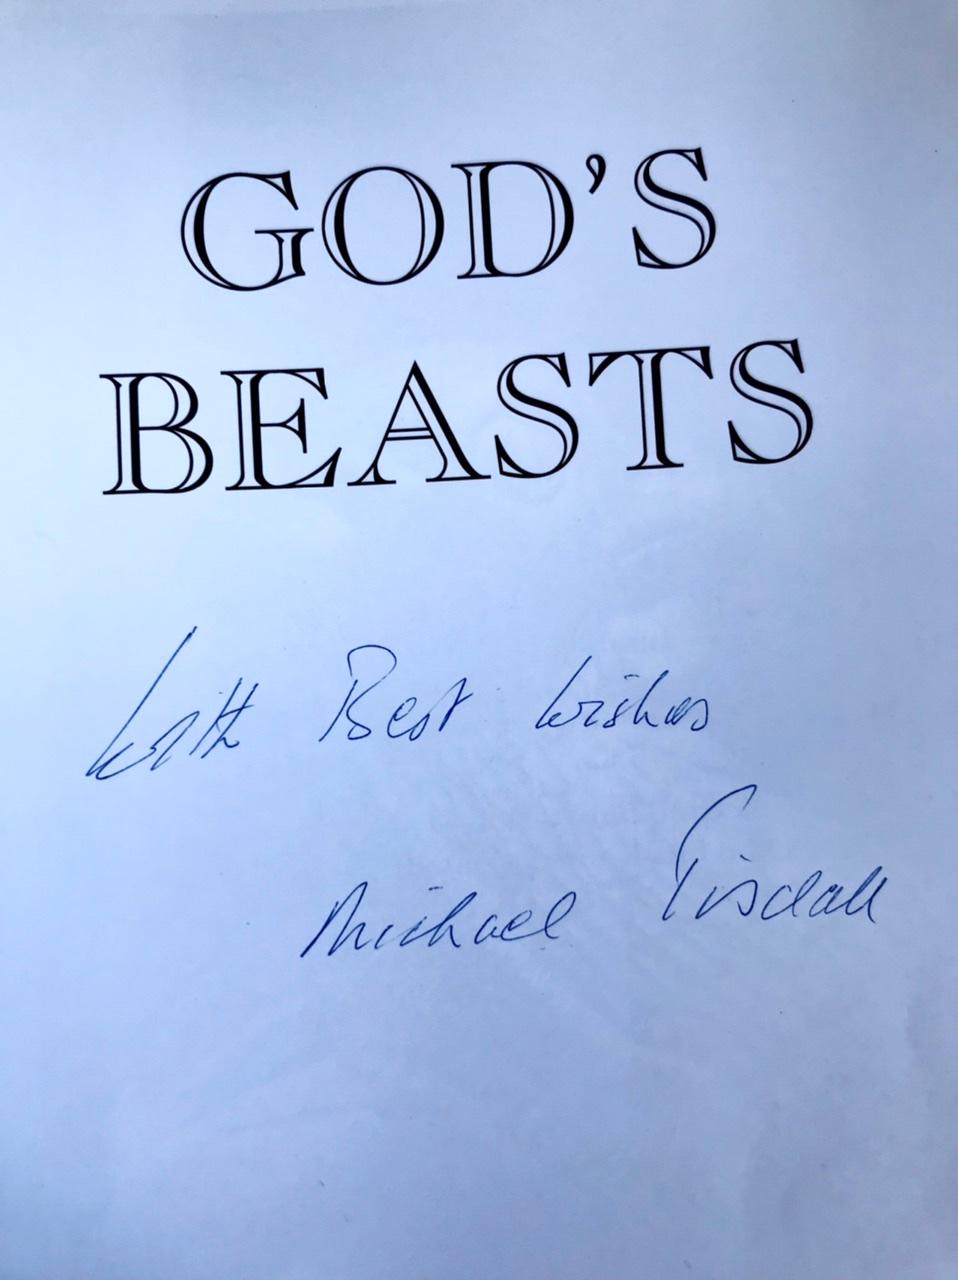 God's Beasts: Identify & Understand Animals In Church Carvings by M. W. Tisdall Signed Copy